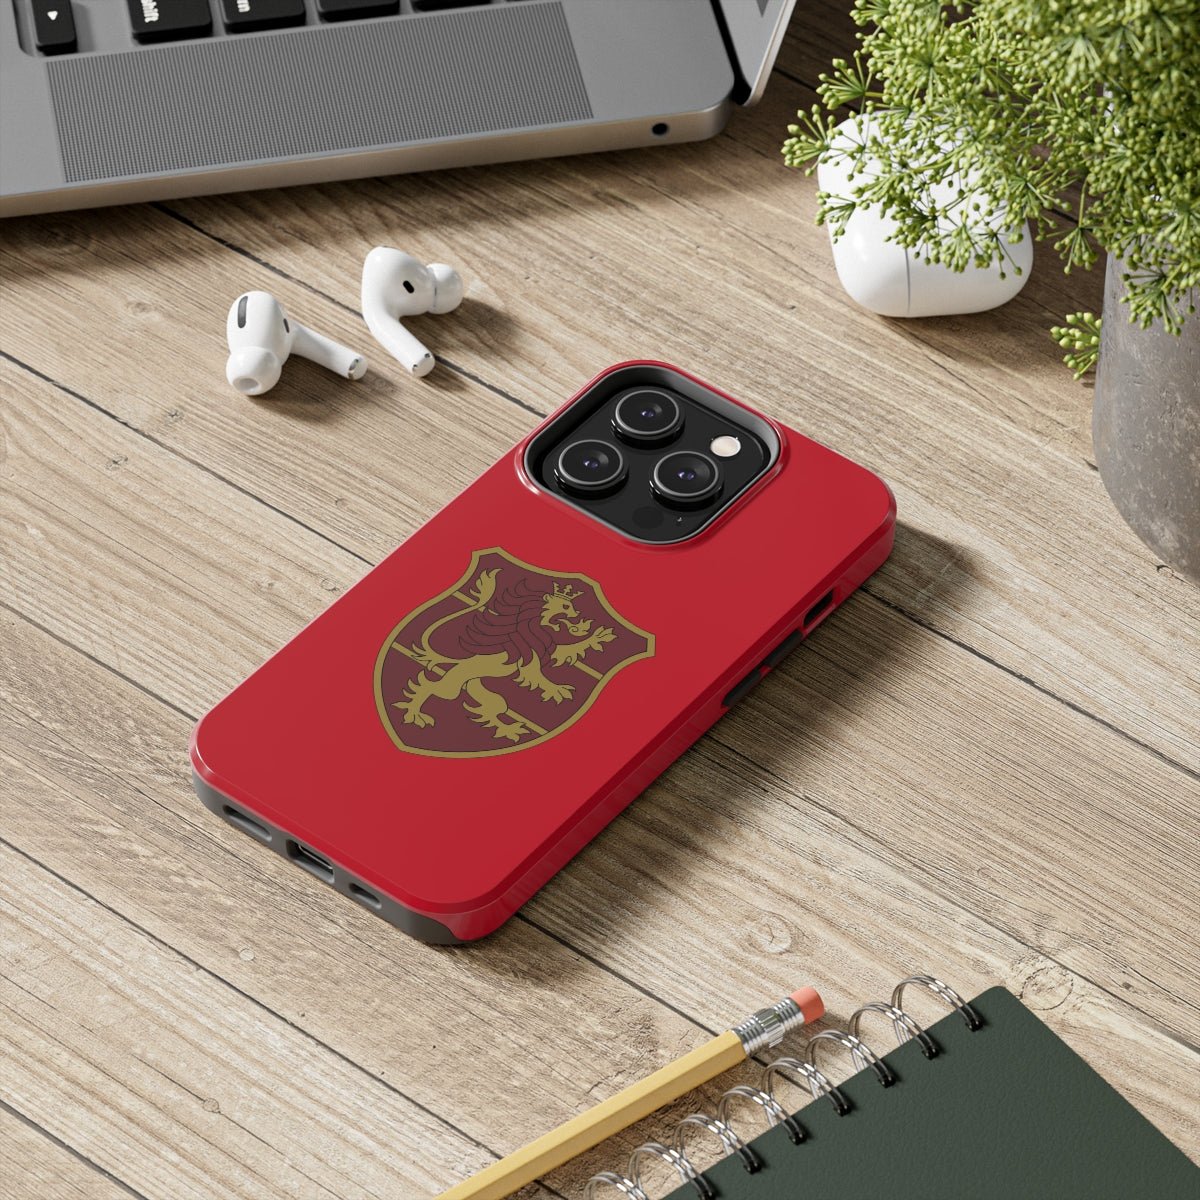 Crimson Lions Black Clover Anime iPhone Case (Series 12, 13, 14) - One Punch Fits